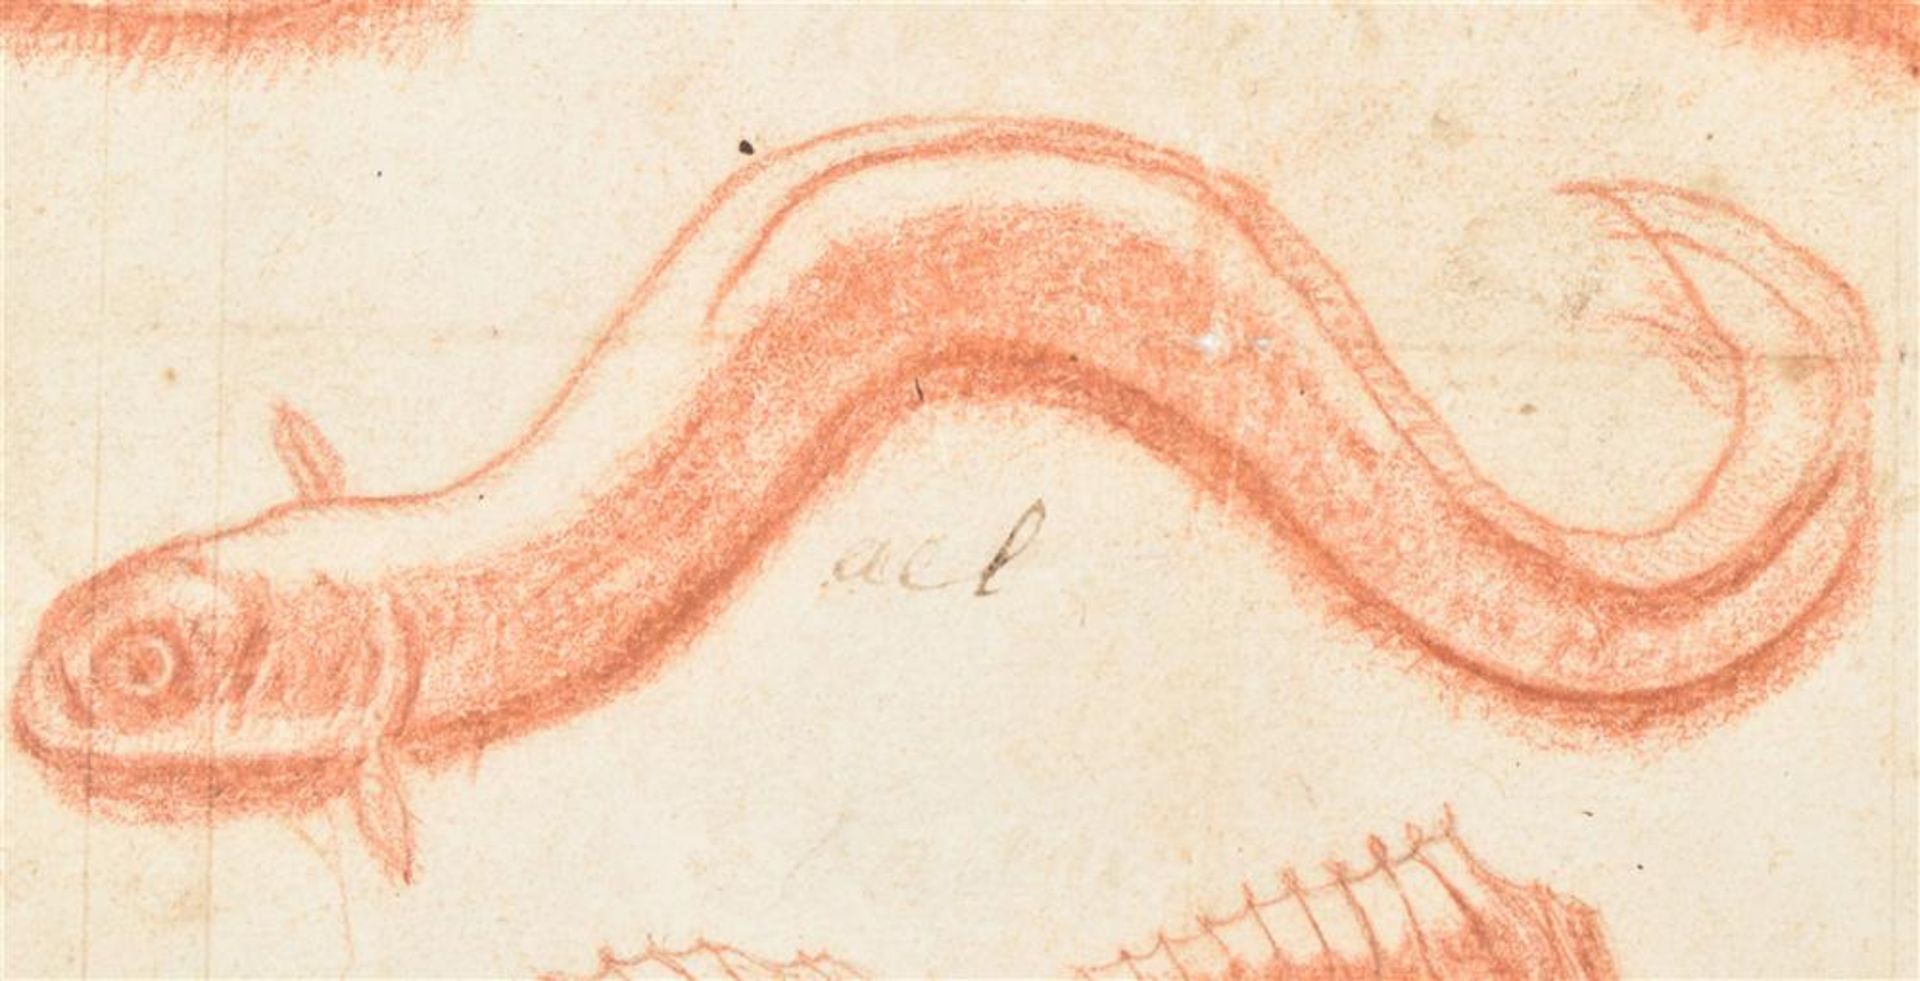 [Ichthyology] Bruyn, N. de (after). Drawings of fishes - Image 3 of 4